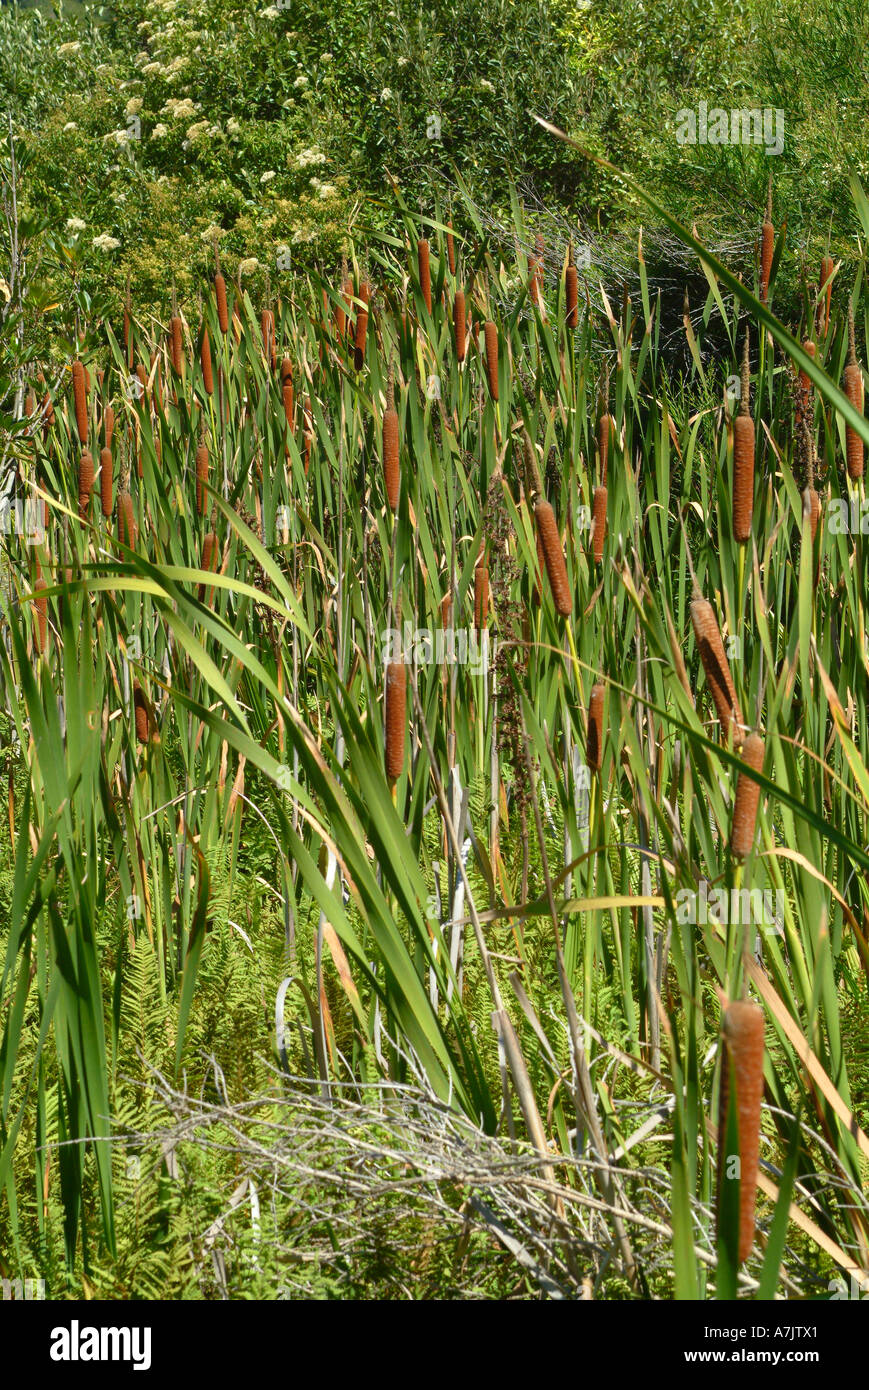 Clump of Bulrushes at Kirstenbosch National Botanical Garden Cape Town South Africa Stock Photo